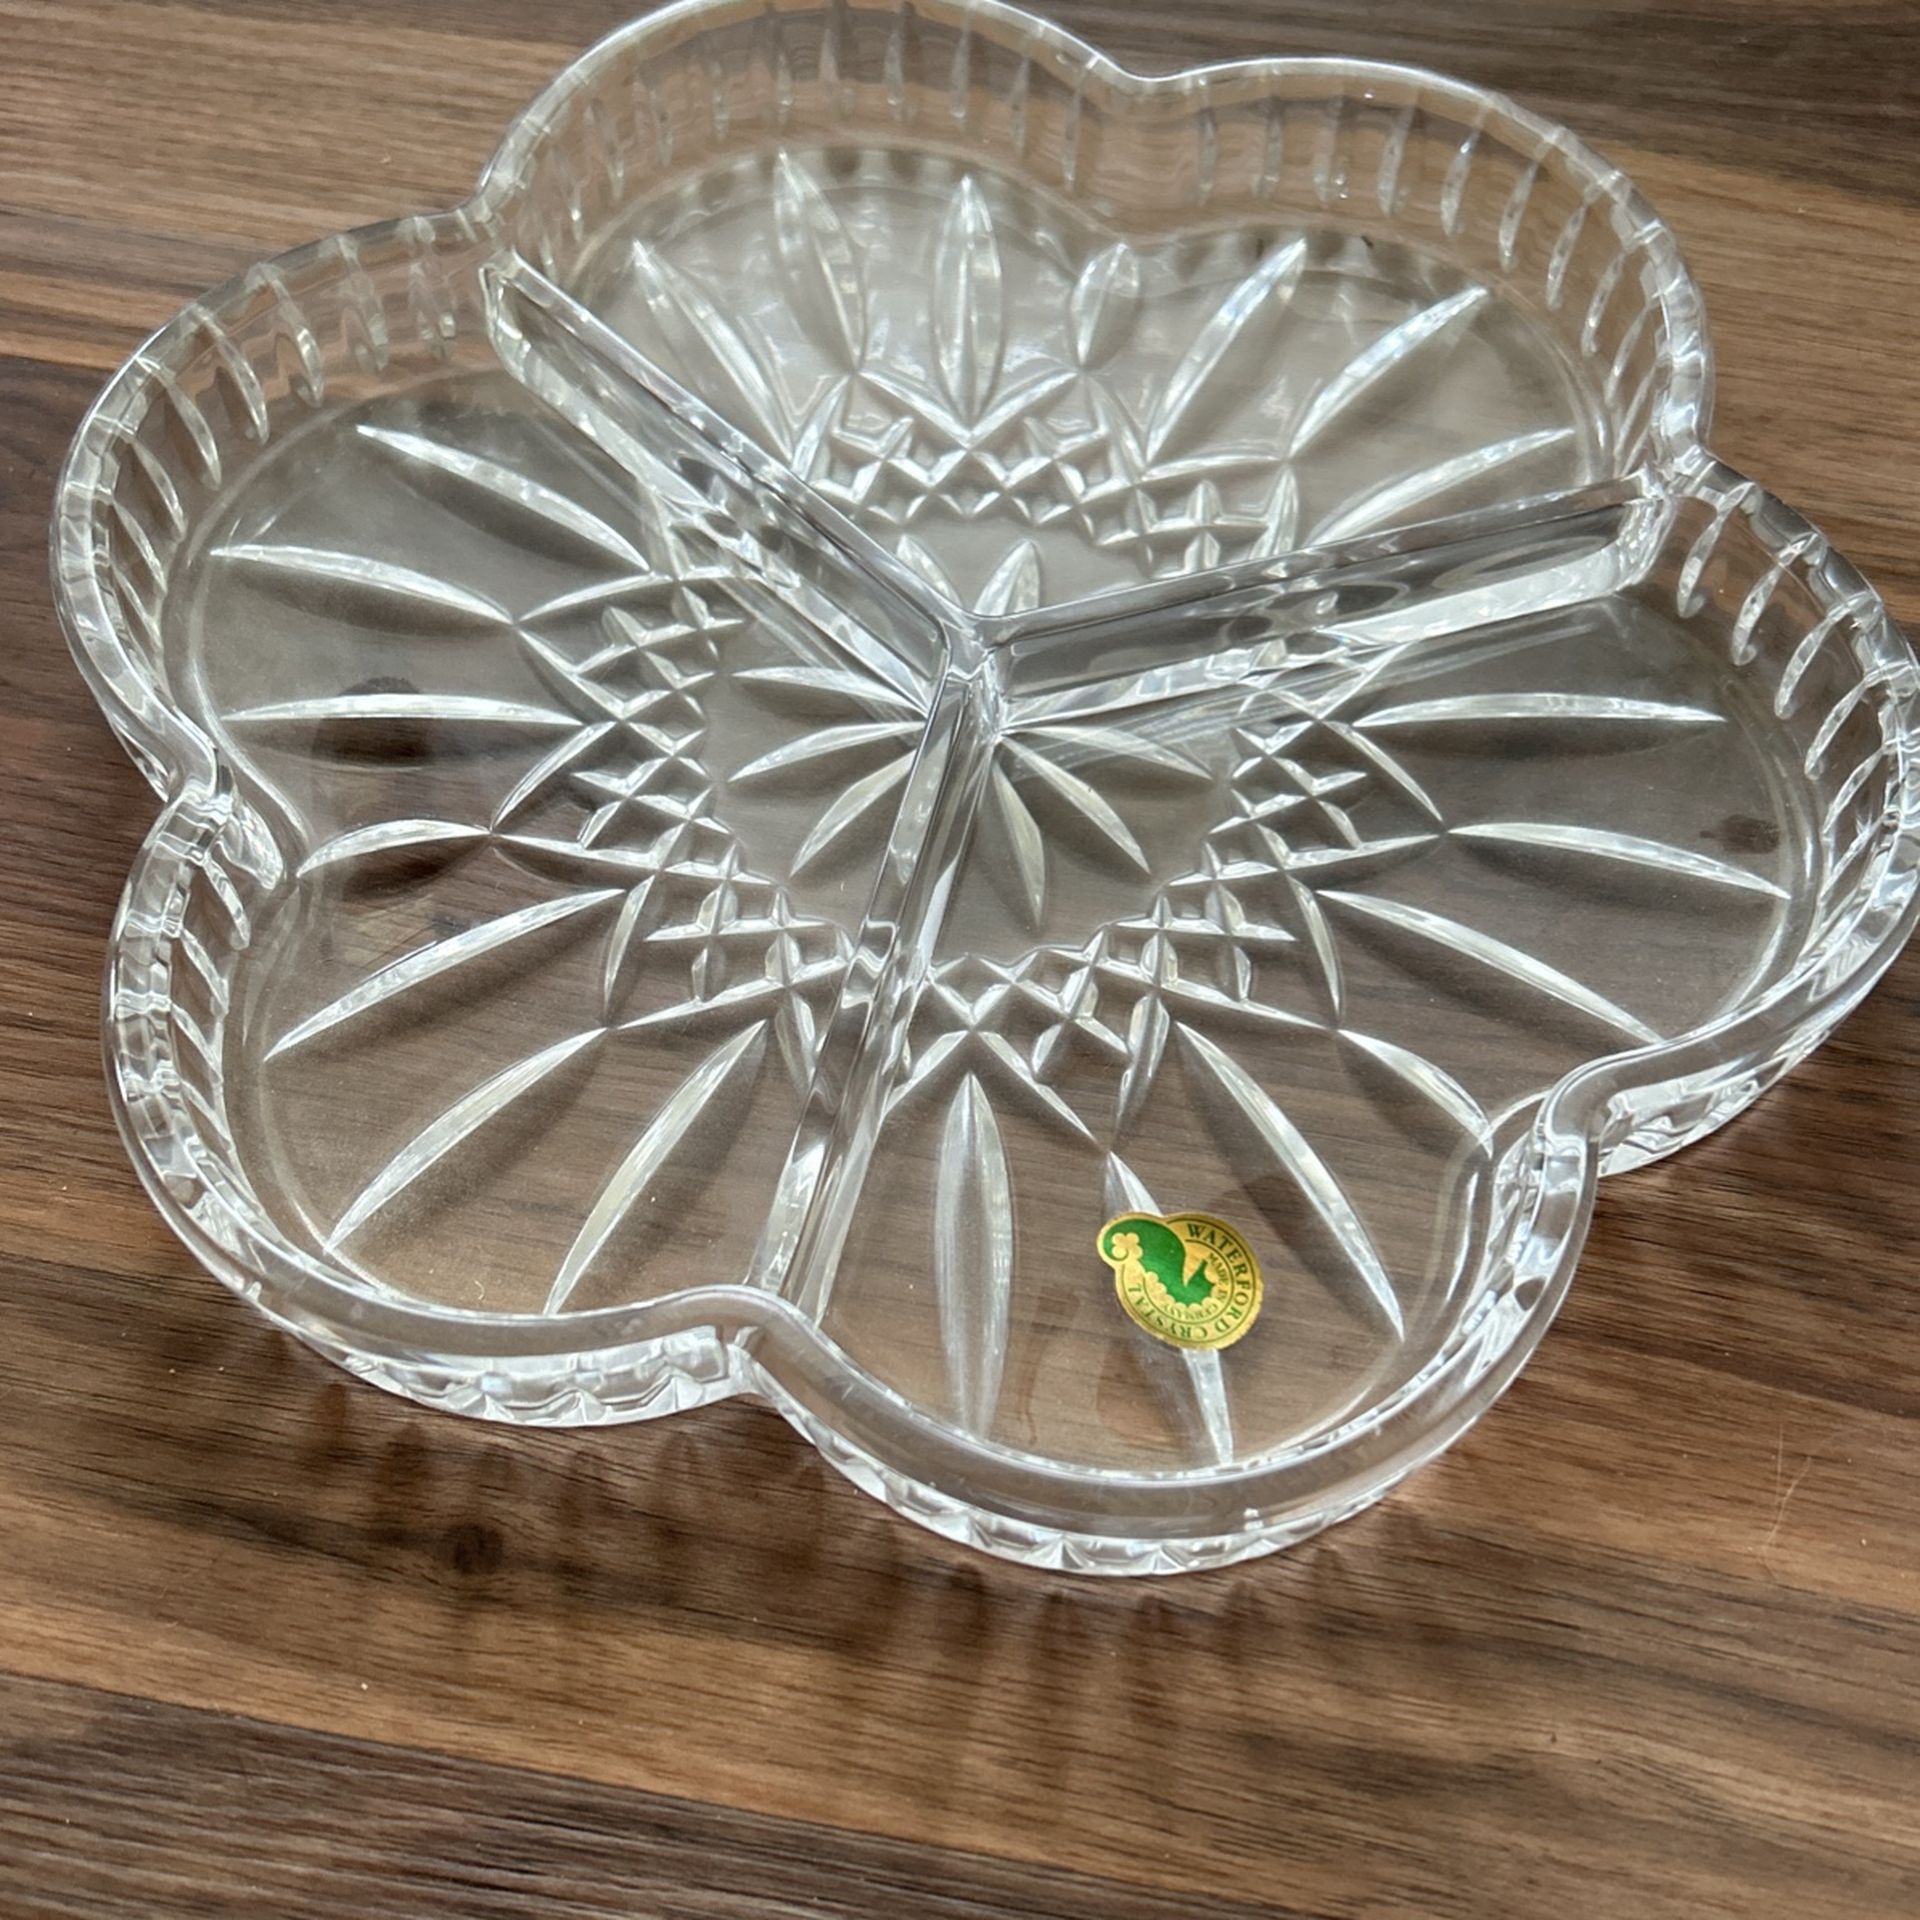 Waterford Crystal Candy Dish